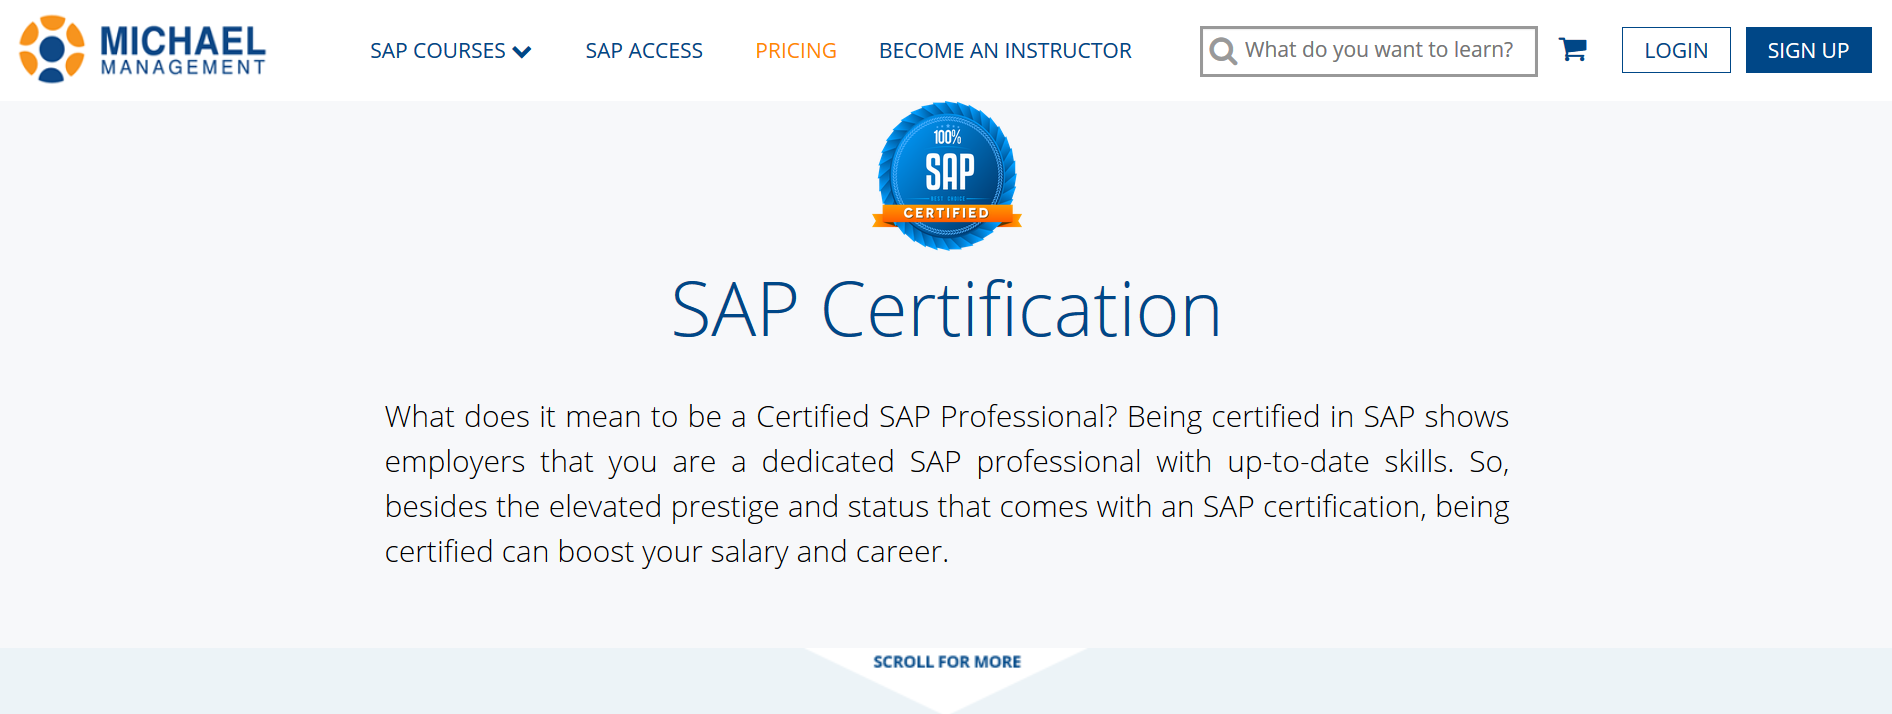 How to get an SAP professional certification online?